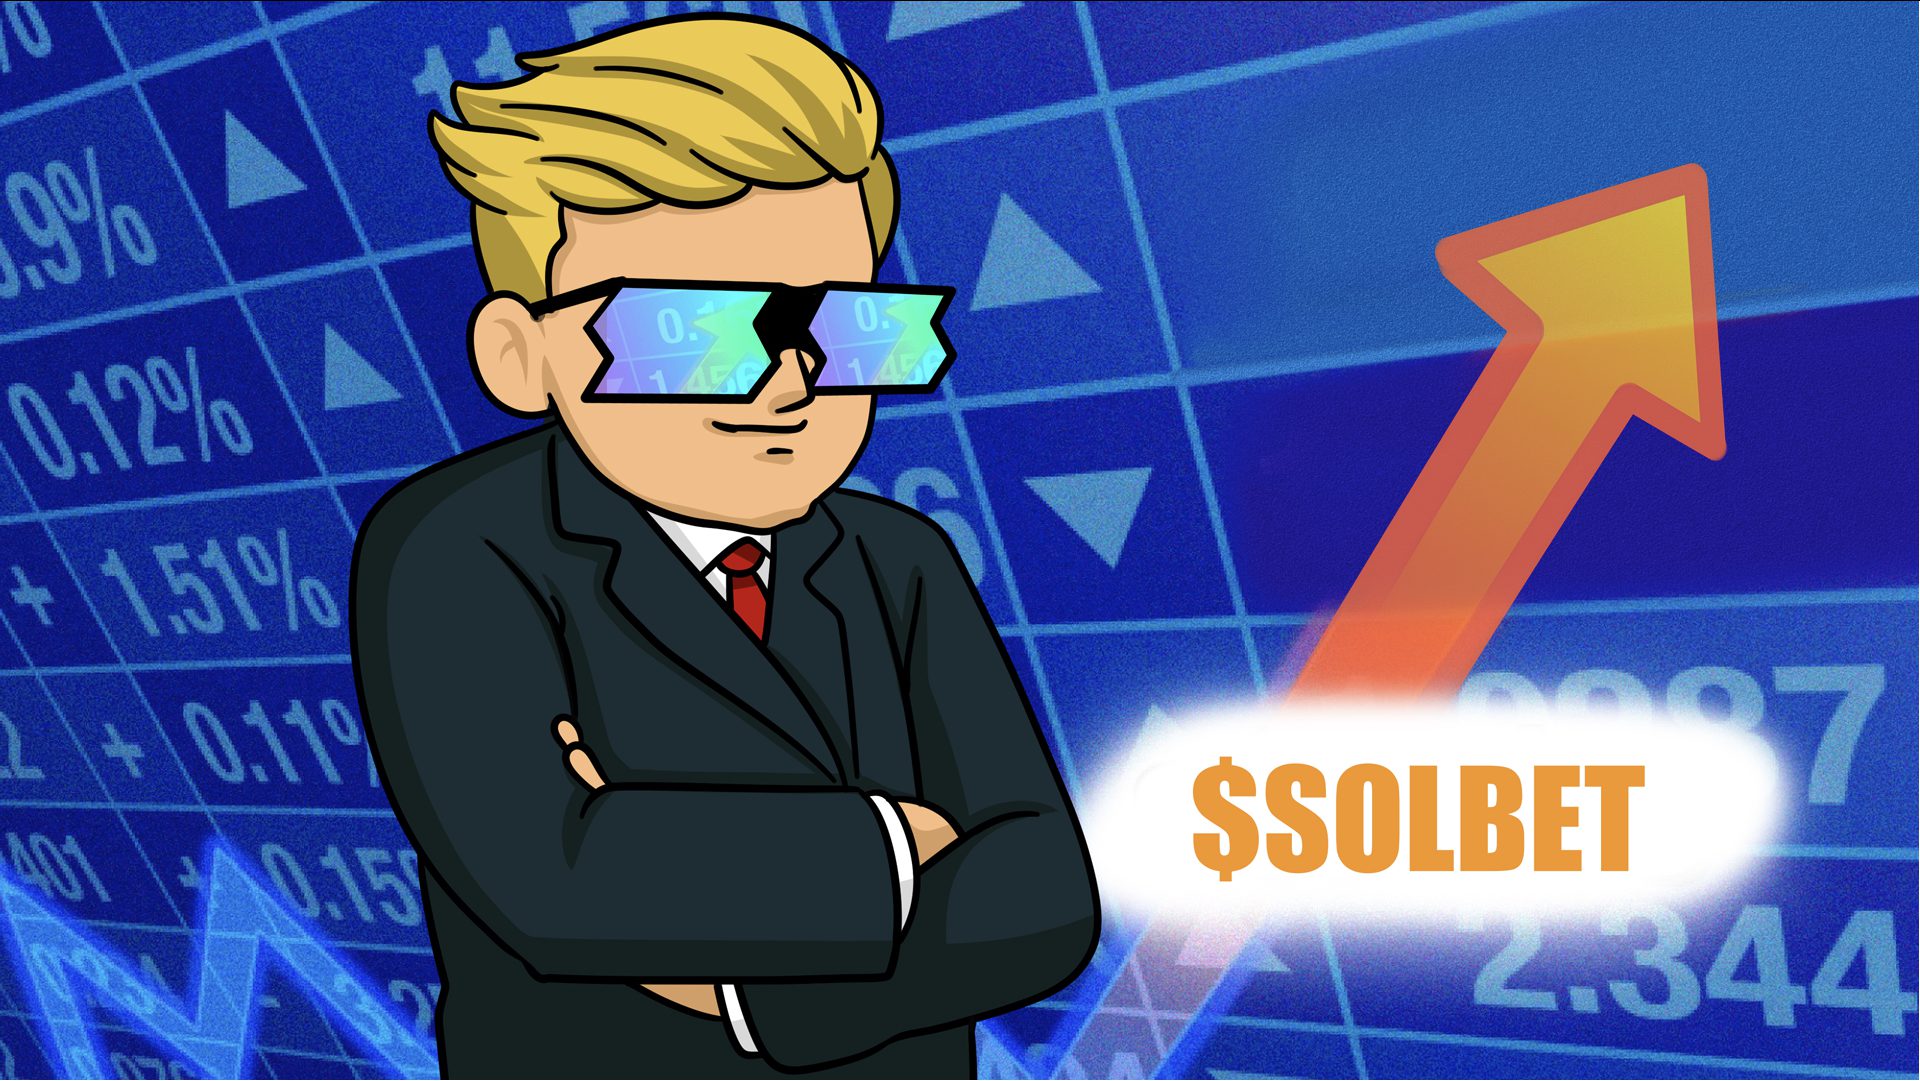 Solana-Based SOL Street Bets (SOLBET) Taking Investors By Storm